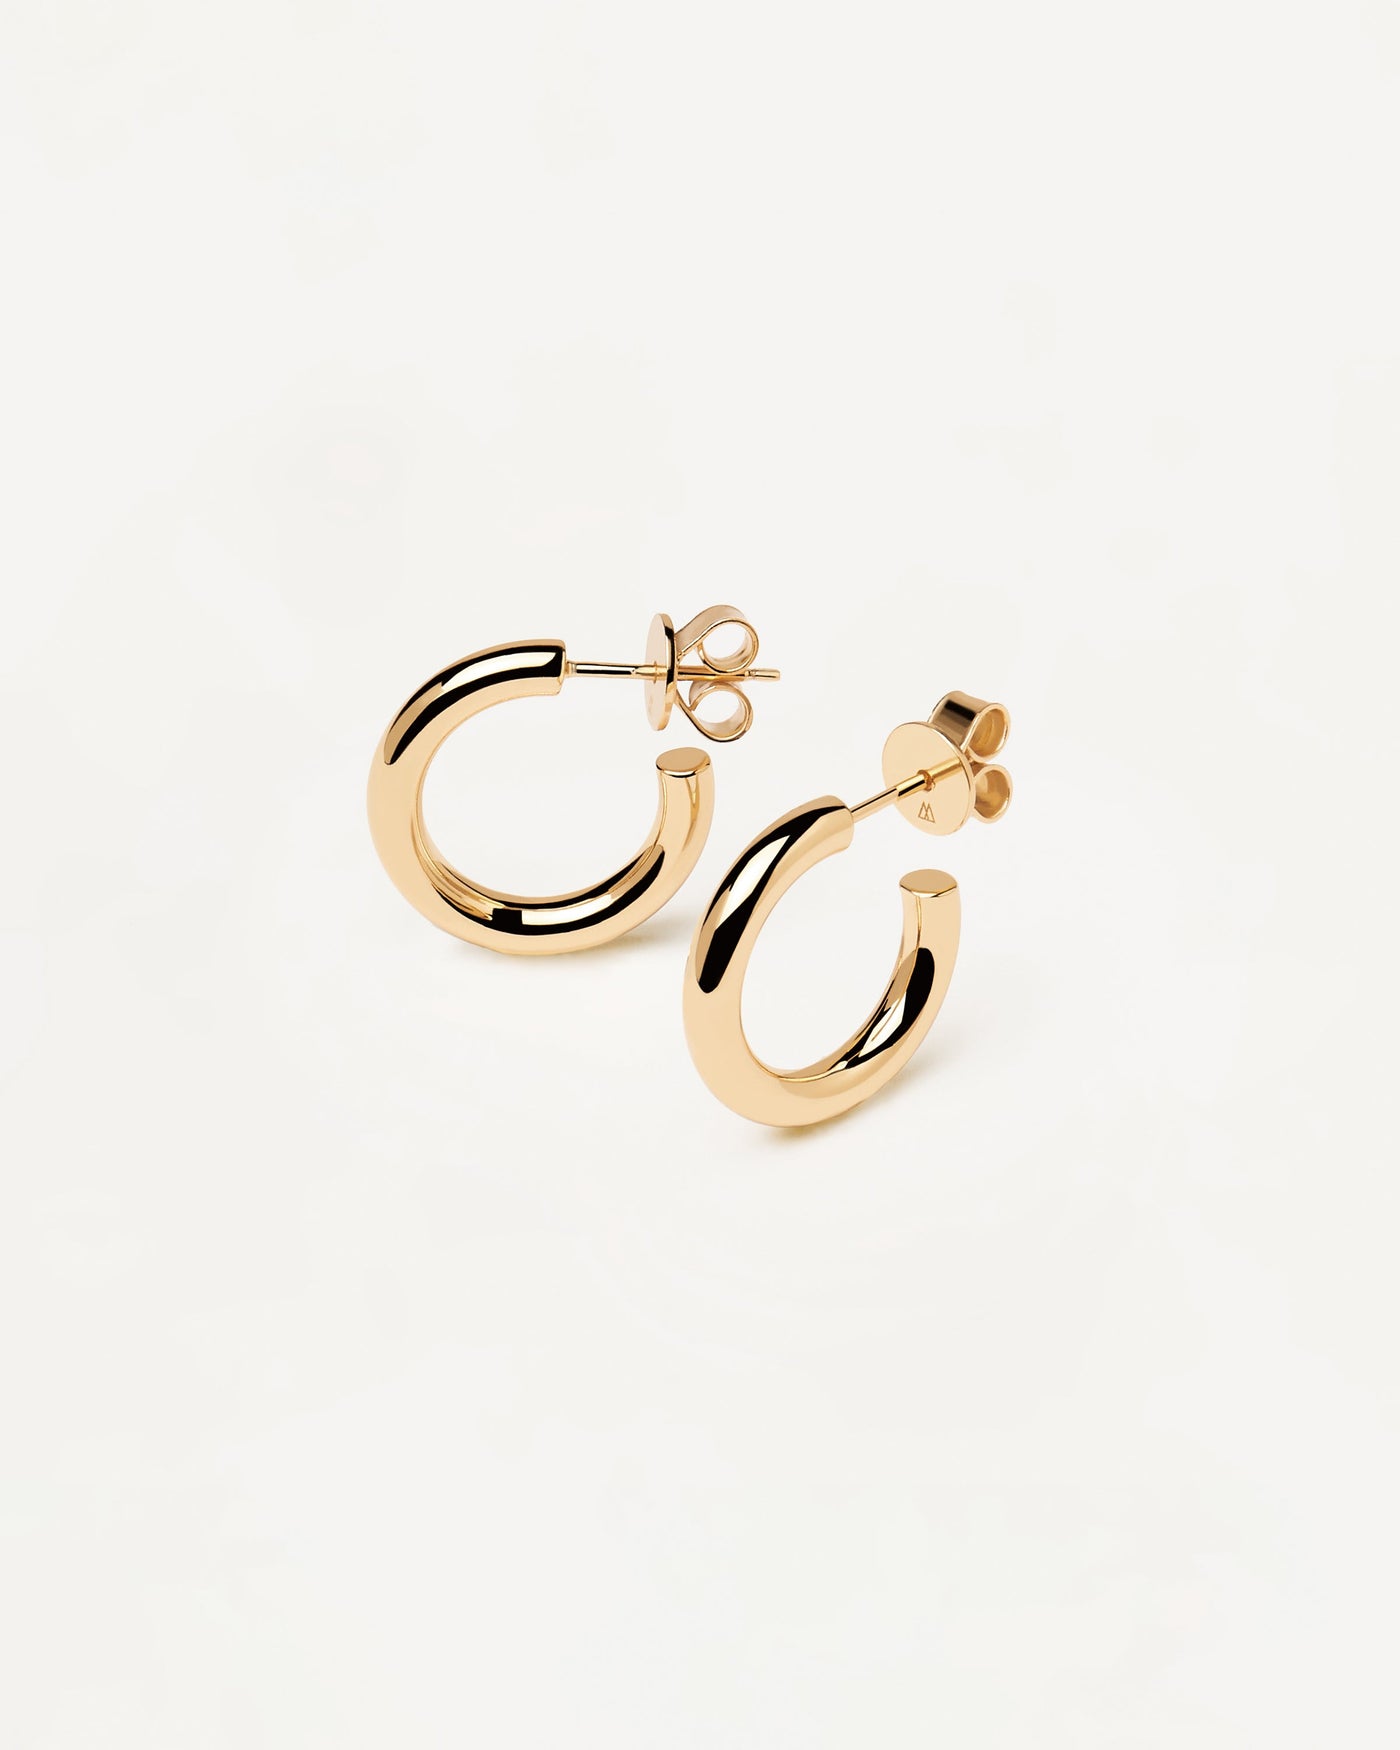 2023 Selection | Medium Cloud Earrings. C-hoop earrings in 18k gold plated sterling silver  with a butterfly push-back. Get the latest arrival from PDPAOLA. Place your order safely and get this Best Seller. Free Shipping.